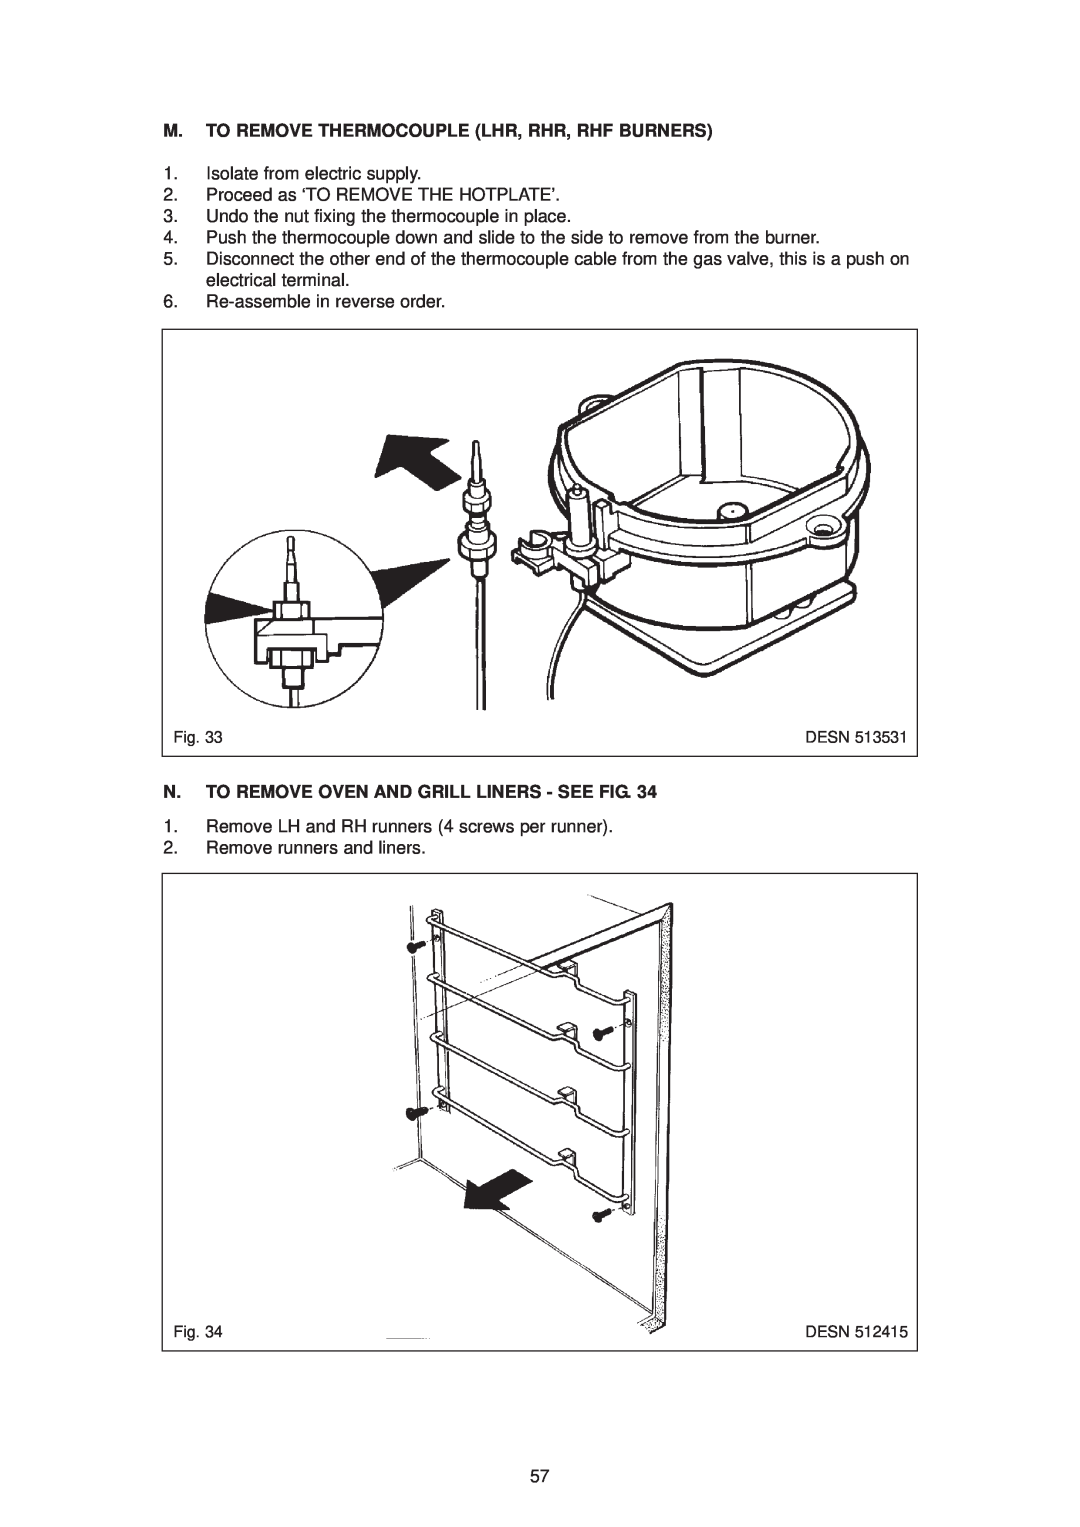 Aga Ranges dc6 owner manual M. To Remove Thermocouple Lhr, Rhr, Rhf Burners, N. To Remove Oven And Grill Liners - See Fig 